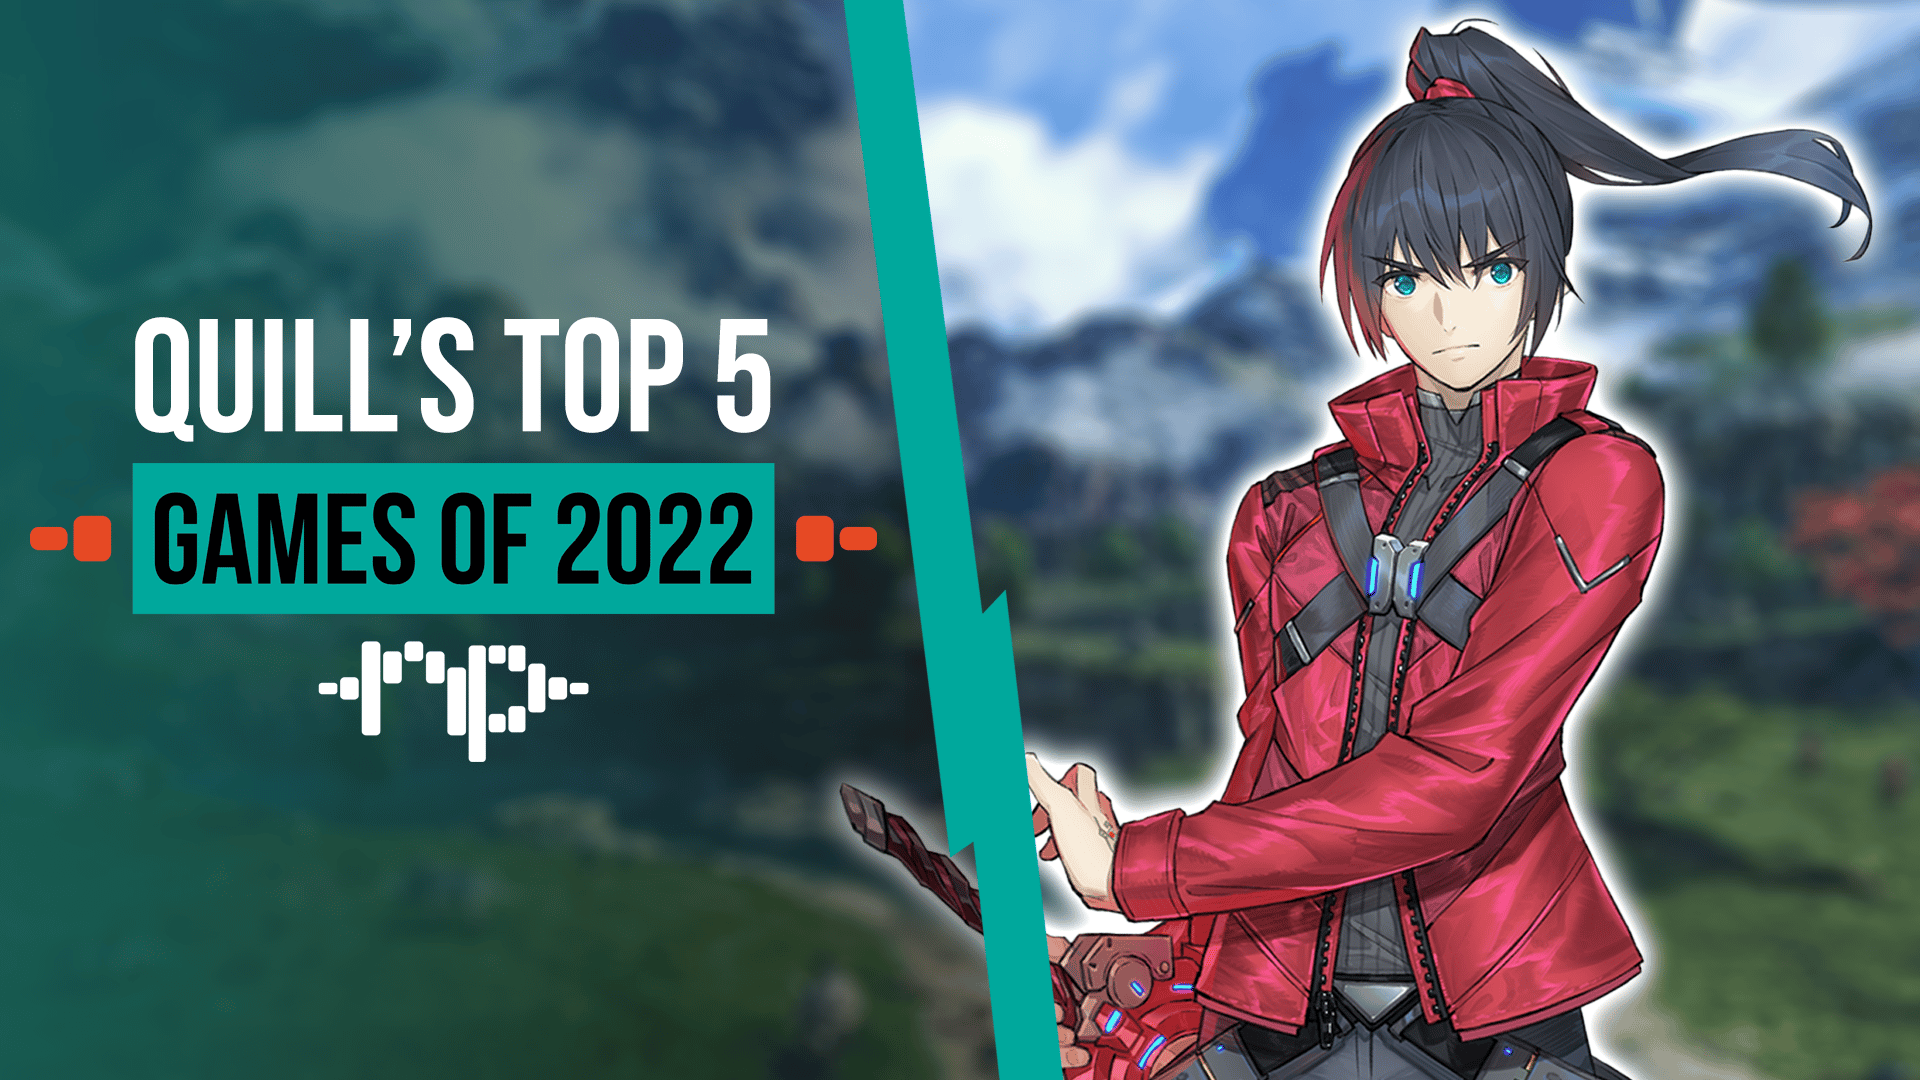 Best Games of 2022: Quill’s Top 5 Games of 2022